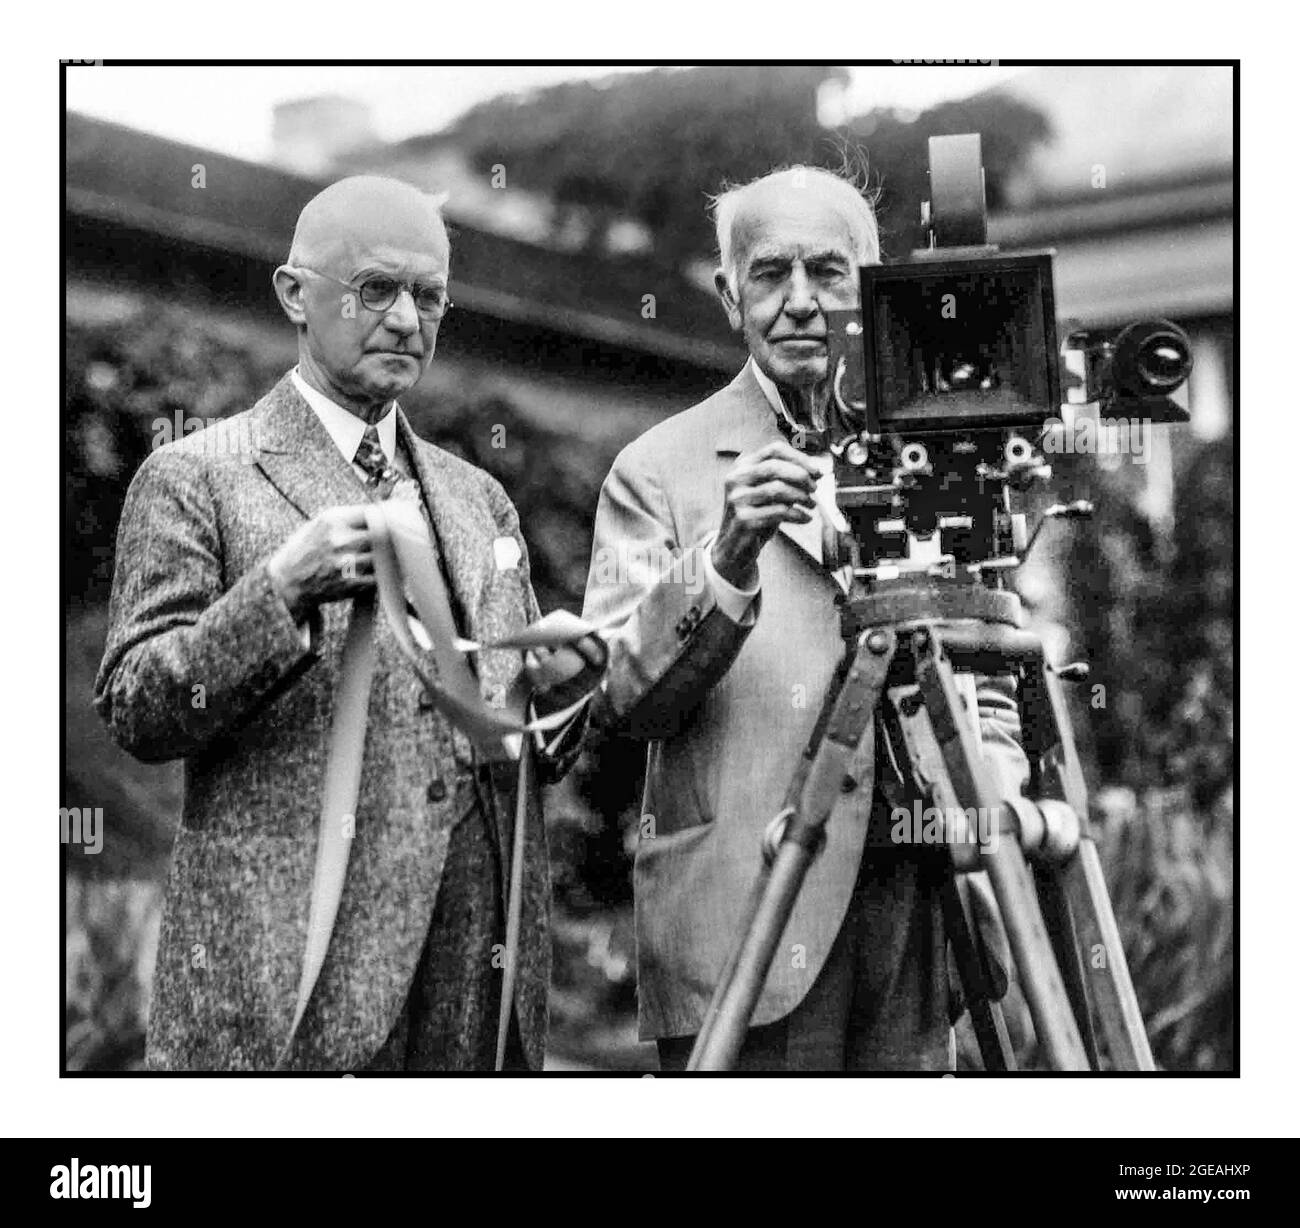 George Eastman and Thomas Edison  In July 1928, George Eastman and Thomas Edison introduced their color motion picture film to the world.  Inventor Thomas Edison and George Eastman pose for a portrait with a motion picture camera and film at Eastman's house in 1928 in Rochester, New York. USA Stock Photo